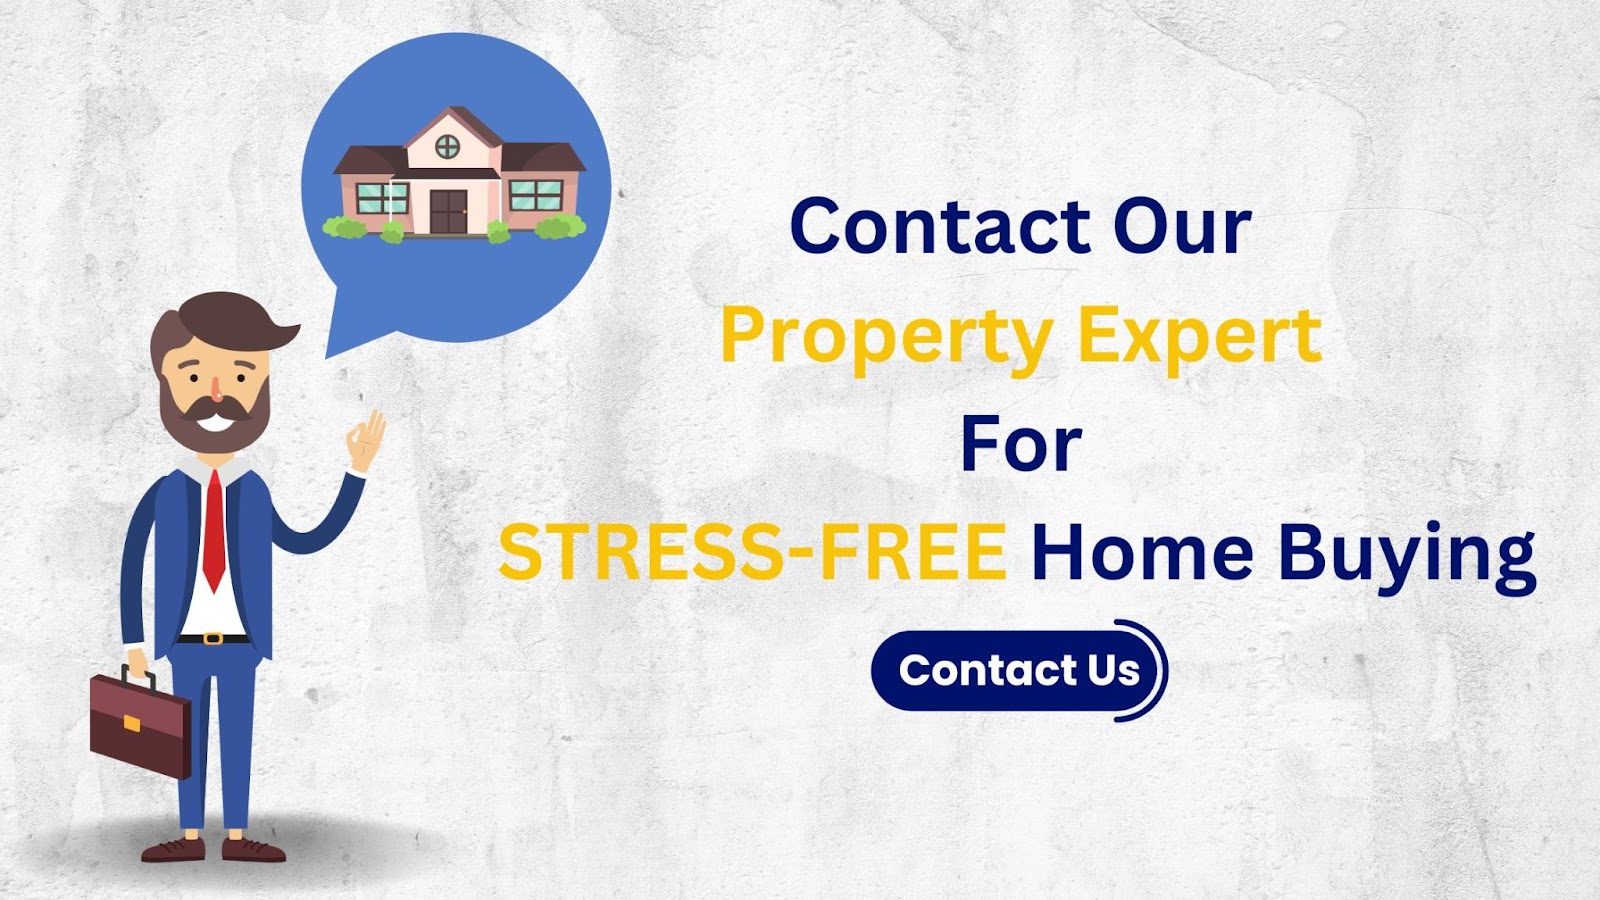 Contact PropertyCloud, and get guidance related to buying your dream home.